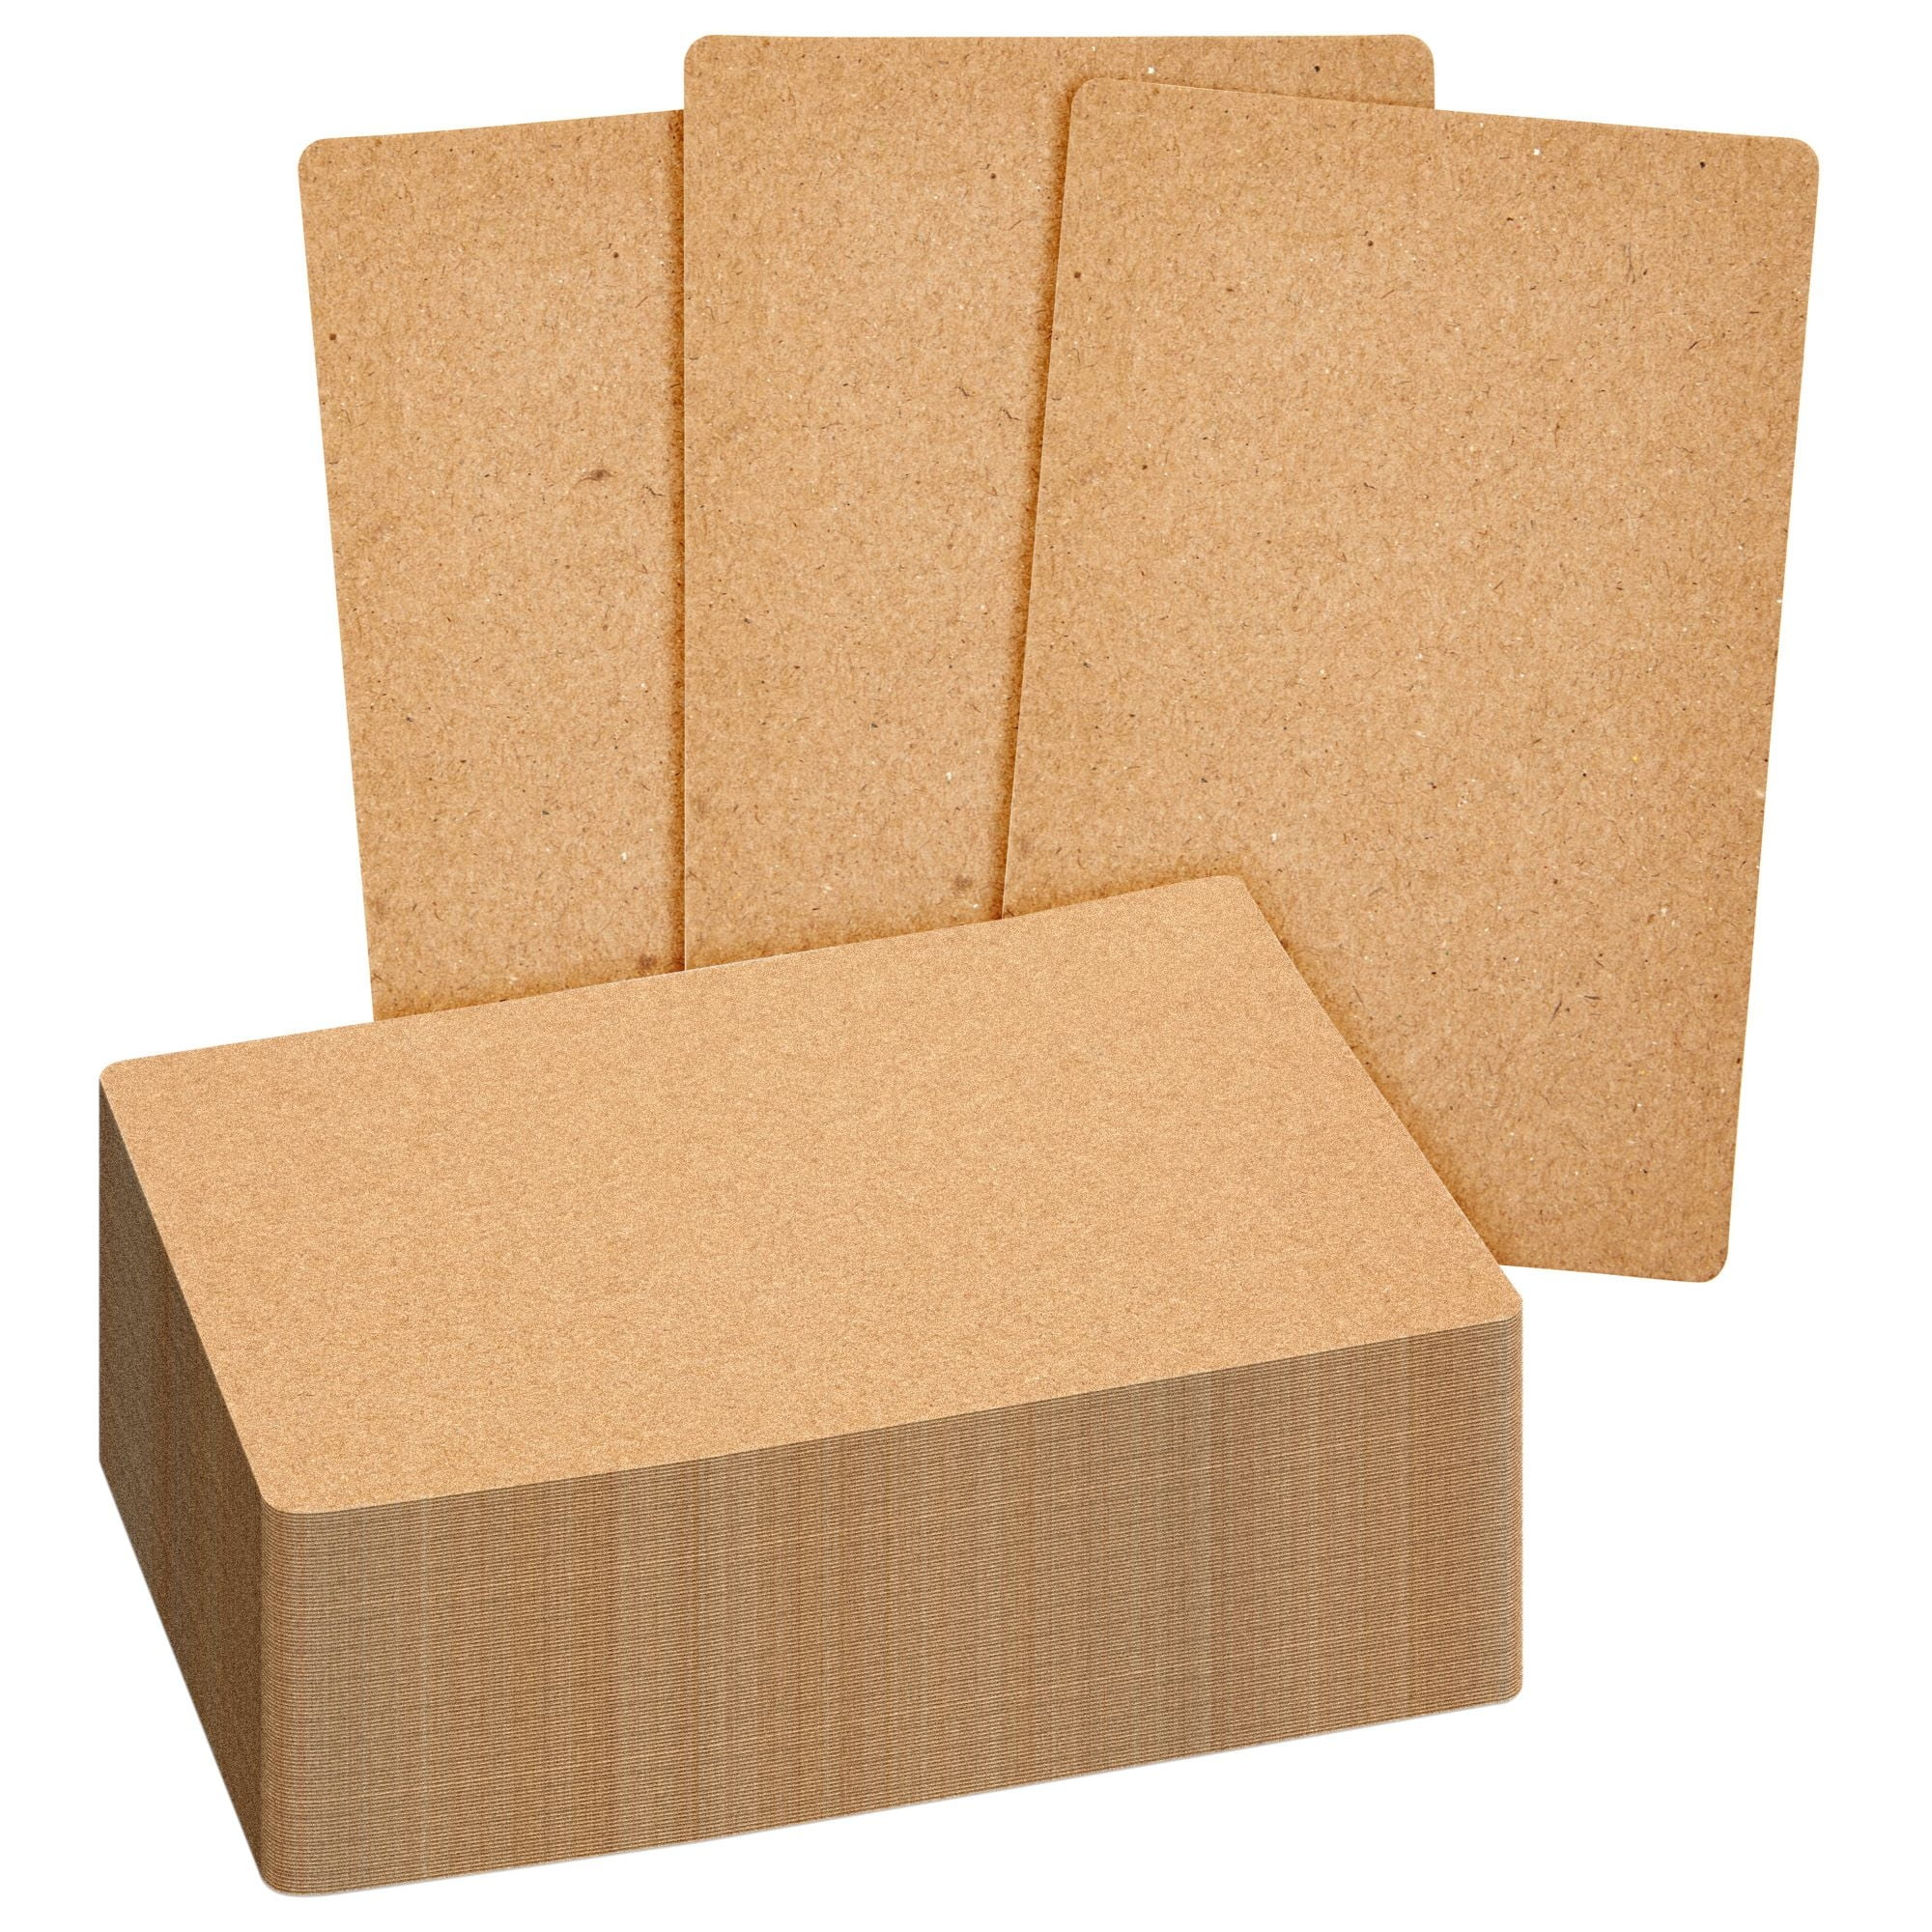 Mr. Pen- Lined Index Cards, 3x5, 100 Cards, Flash Cards, Note Cards, White  Index Card